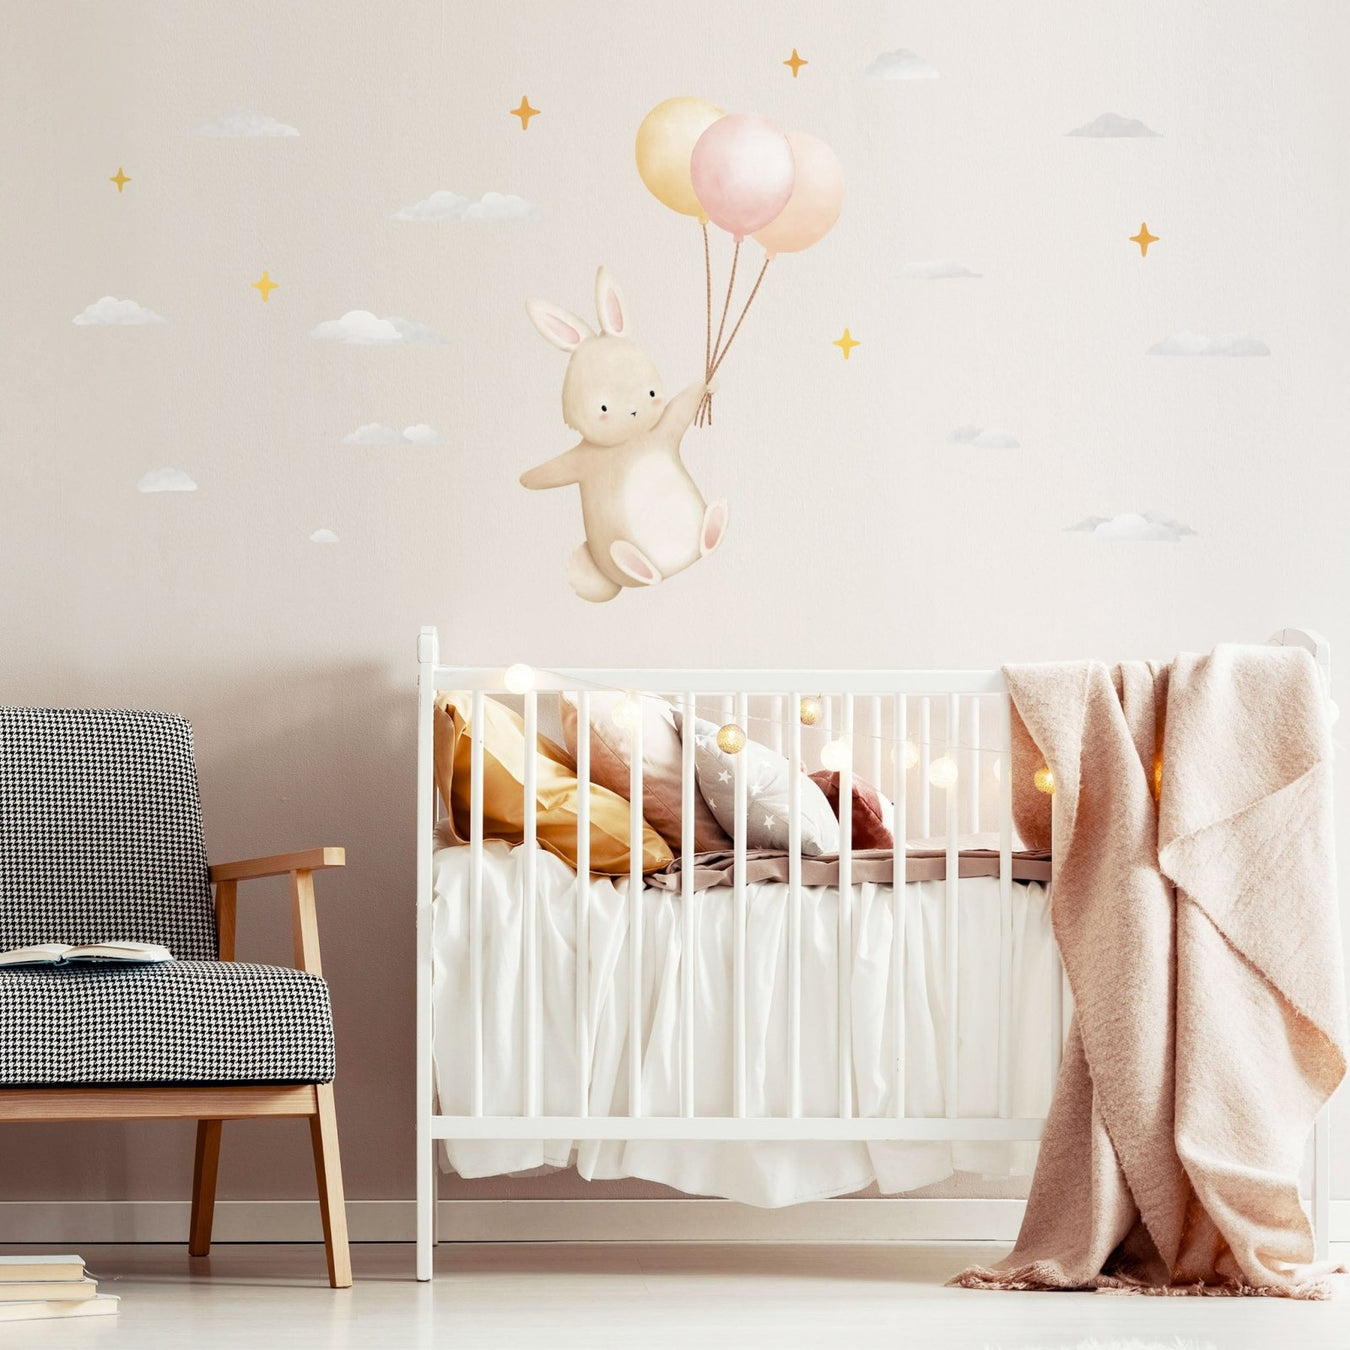 Most Popular Wall Stickers - Made of Sundays